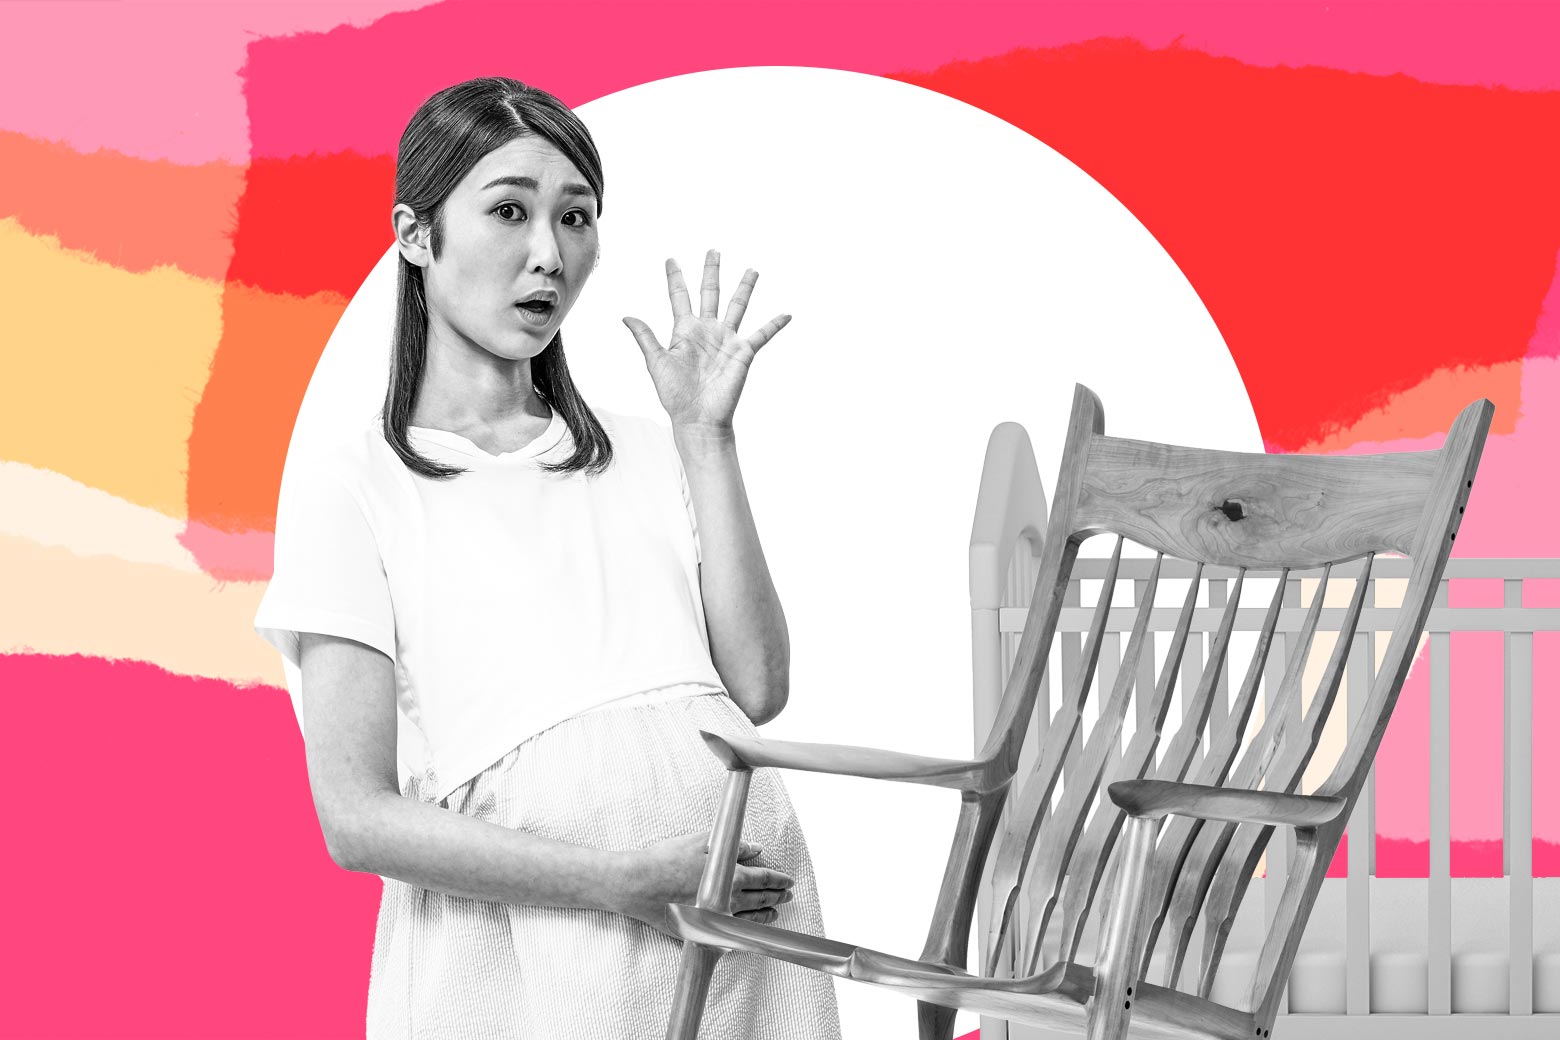 A pregnant woman expresses shock at a baby crib and rocking chair.